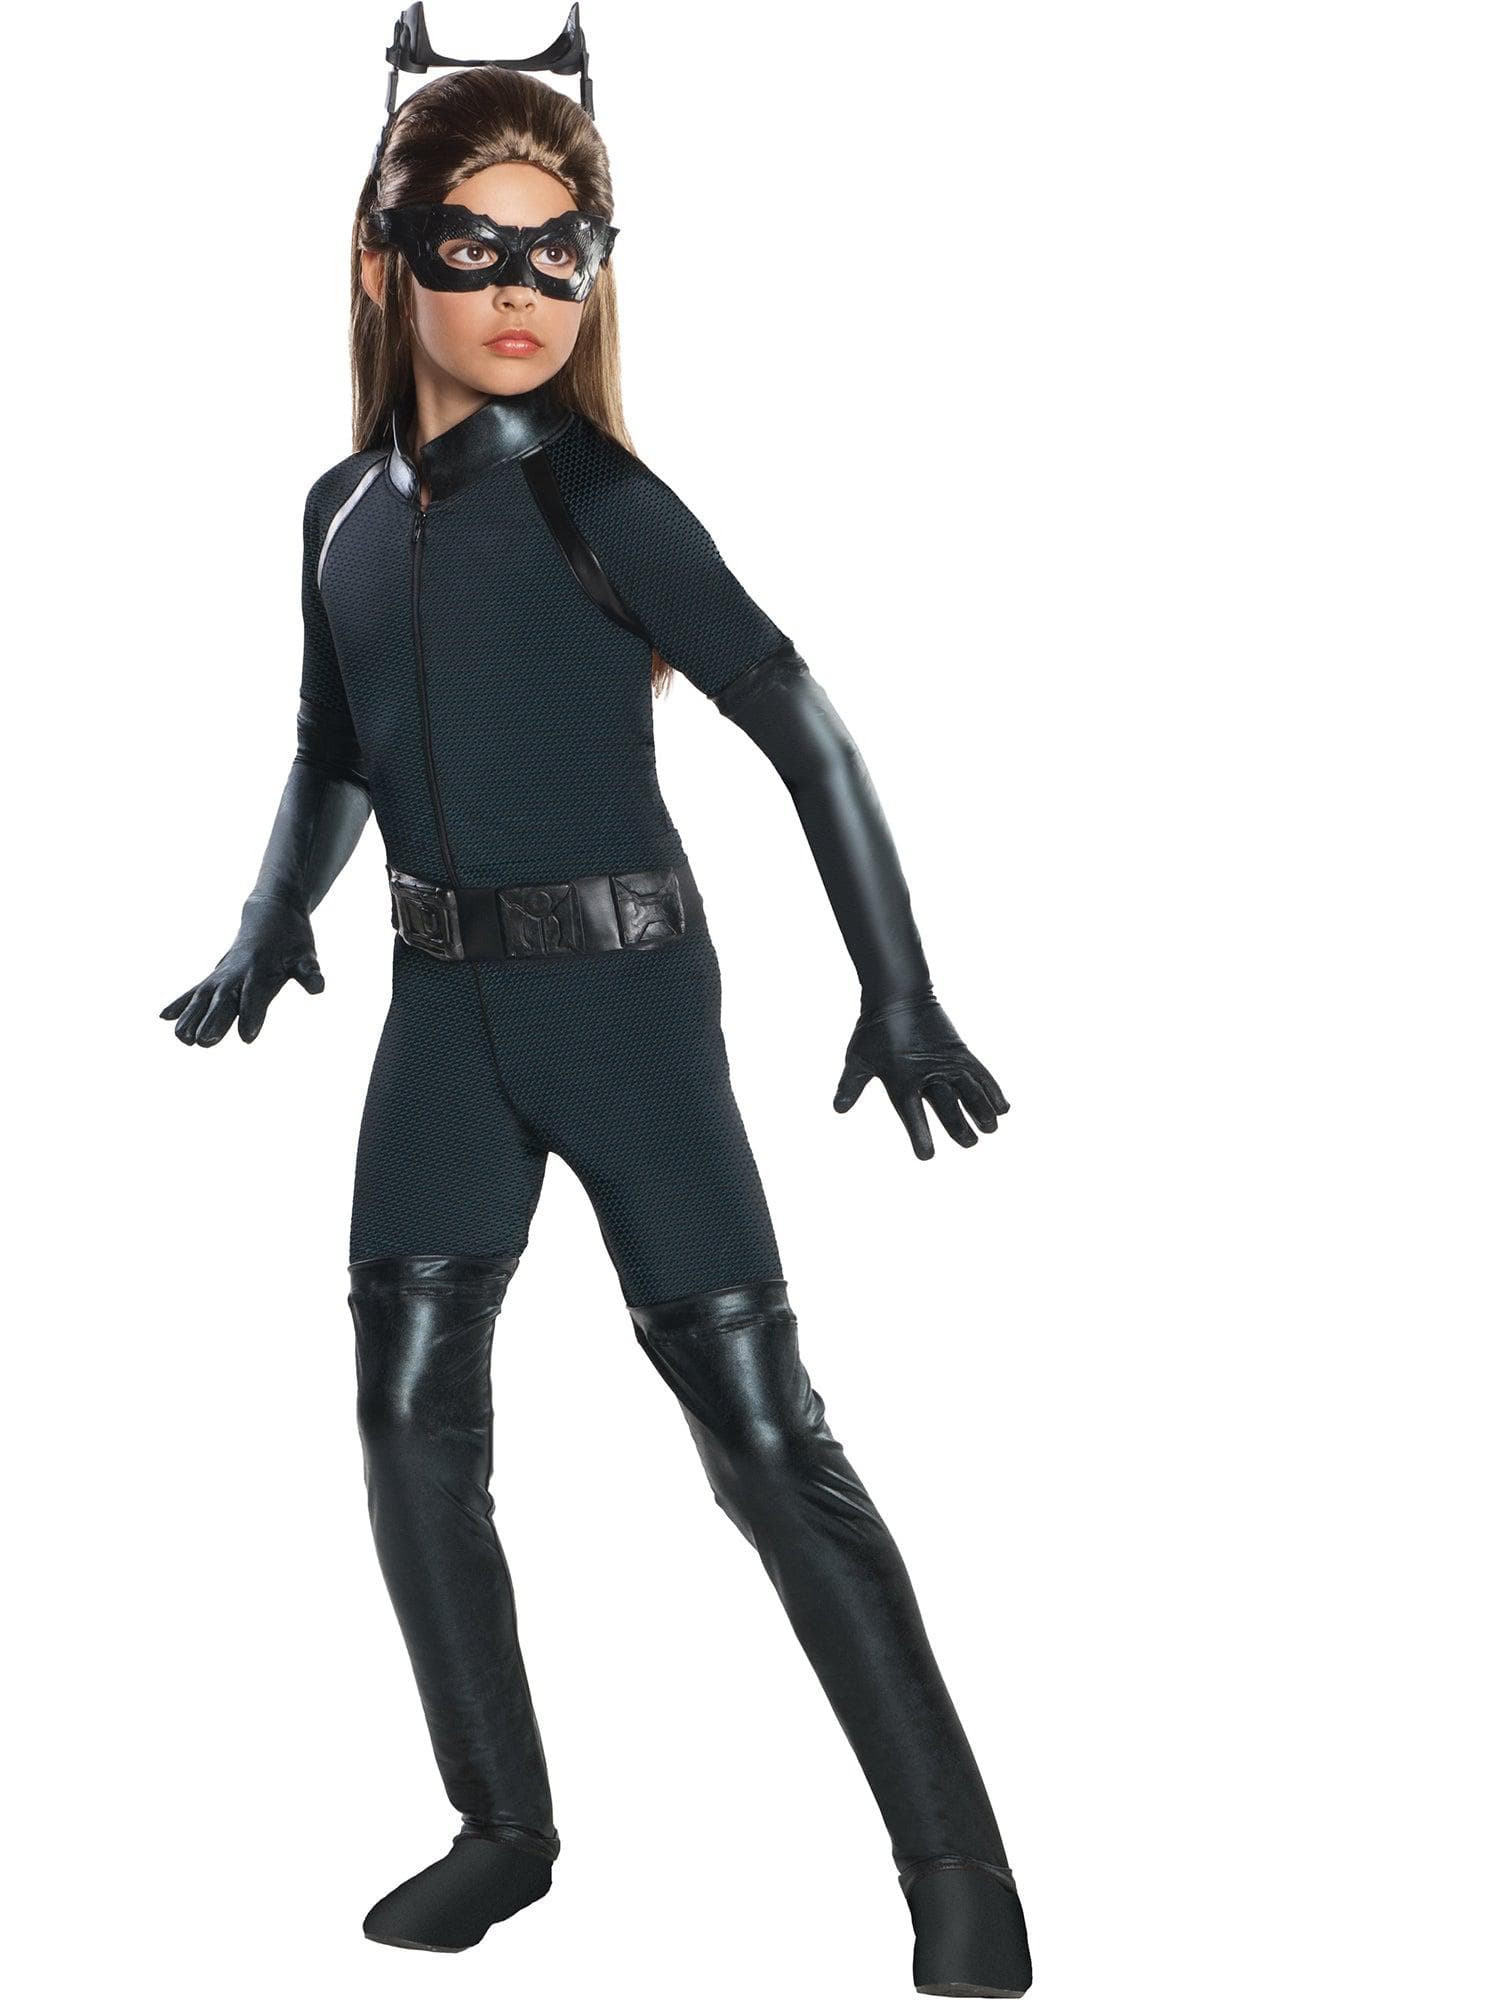 Deluxe Catwoman Girl's Costume - costumes.com